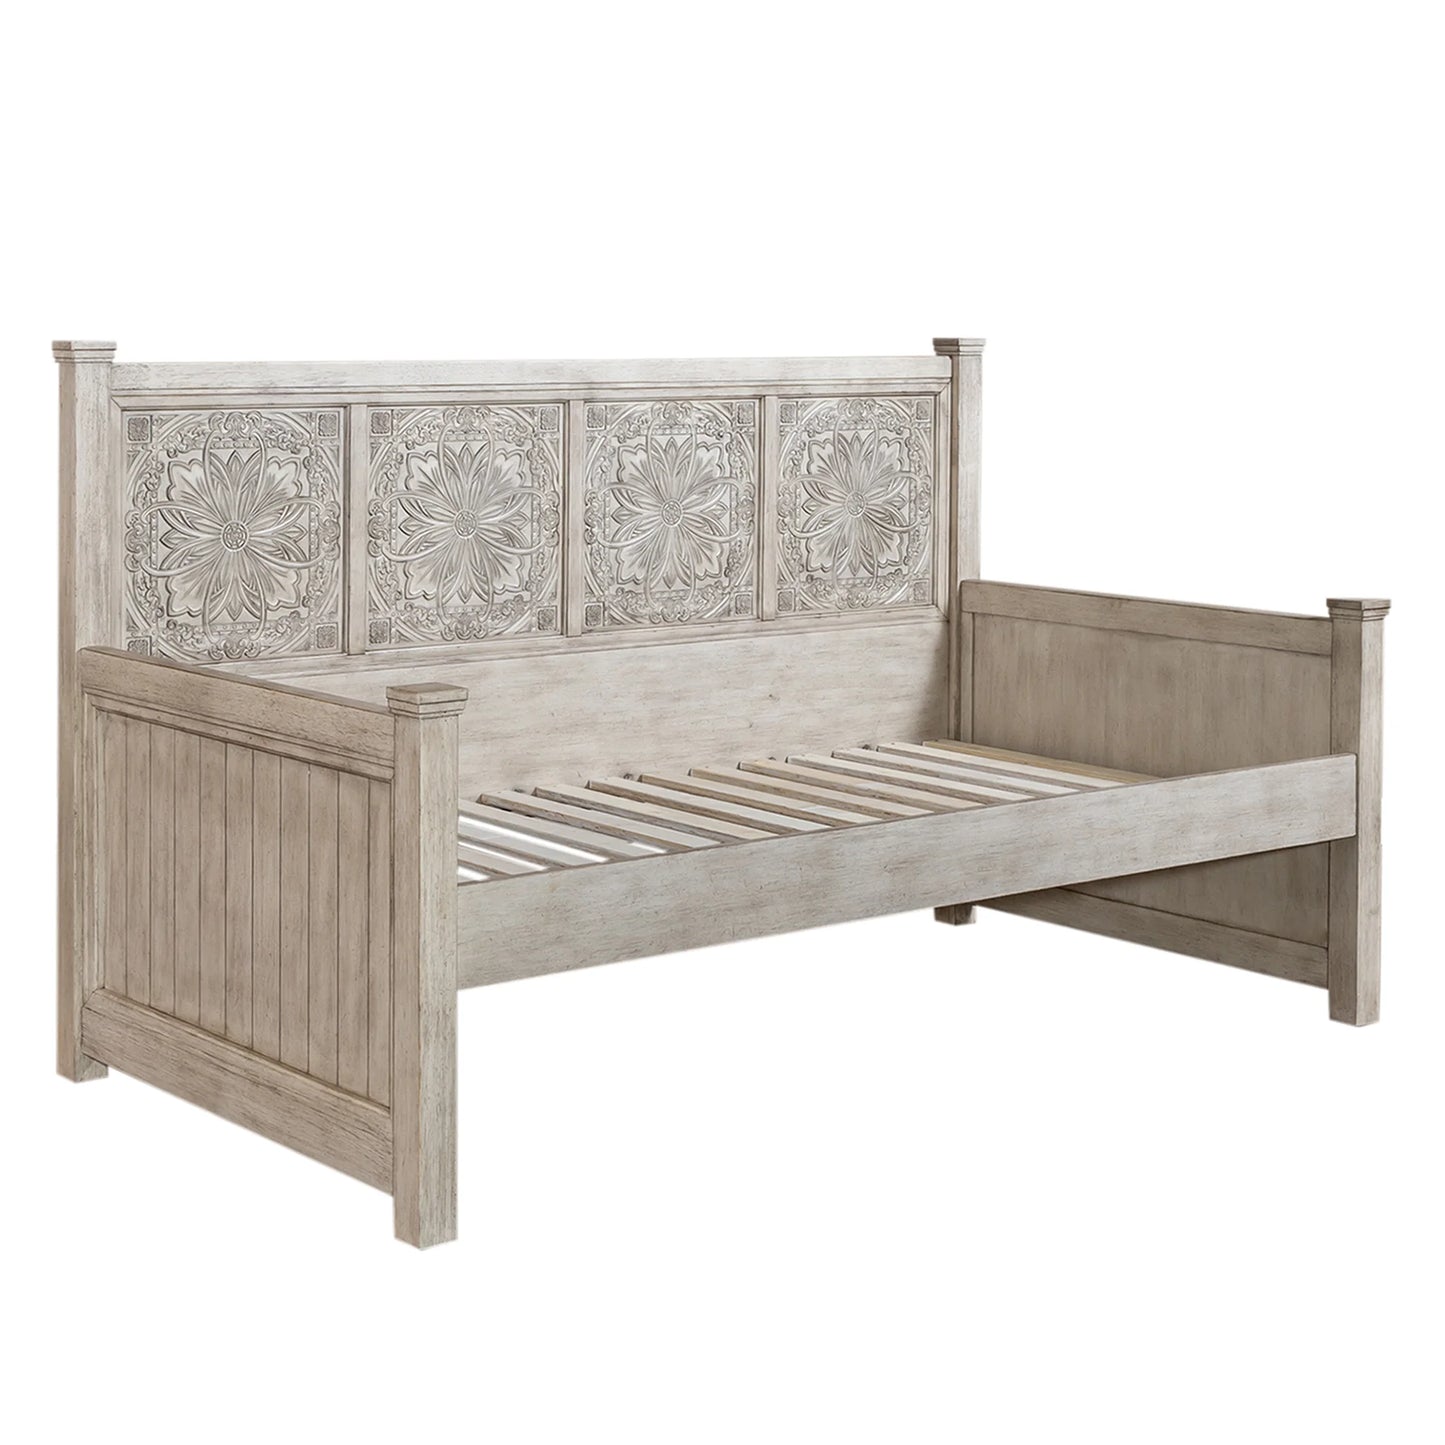 Heartland - Twin Day Bed - White 1